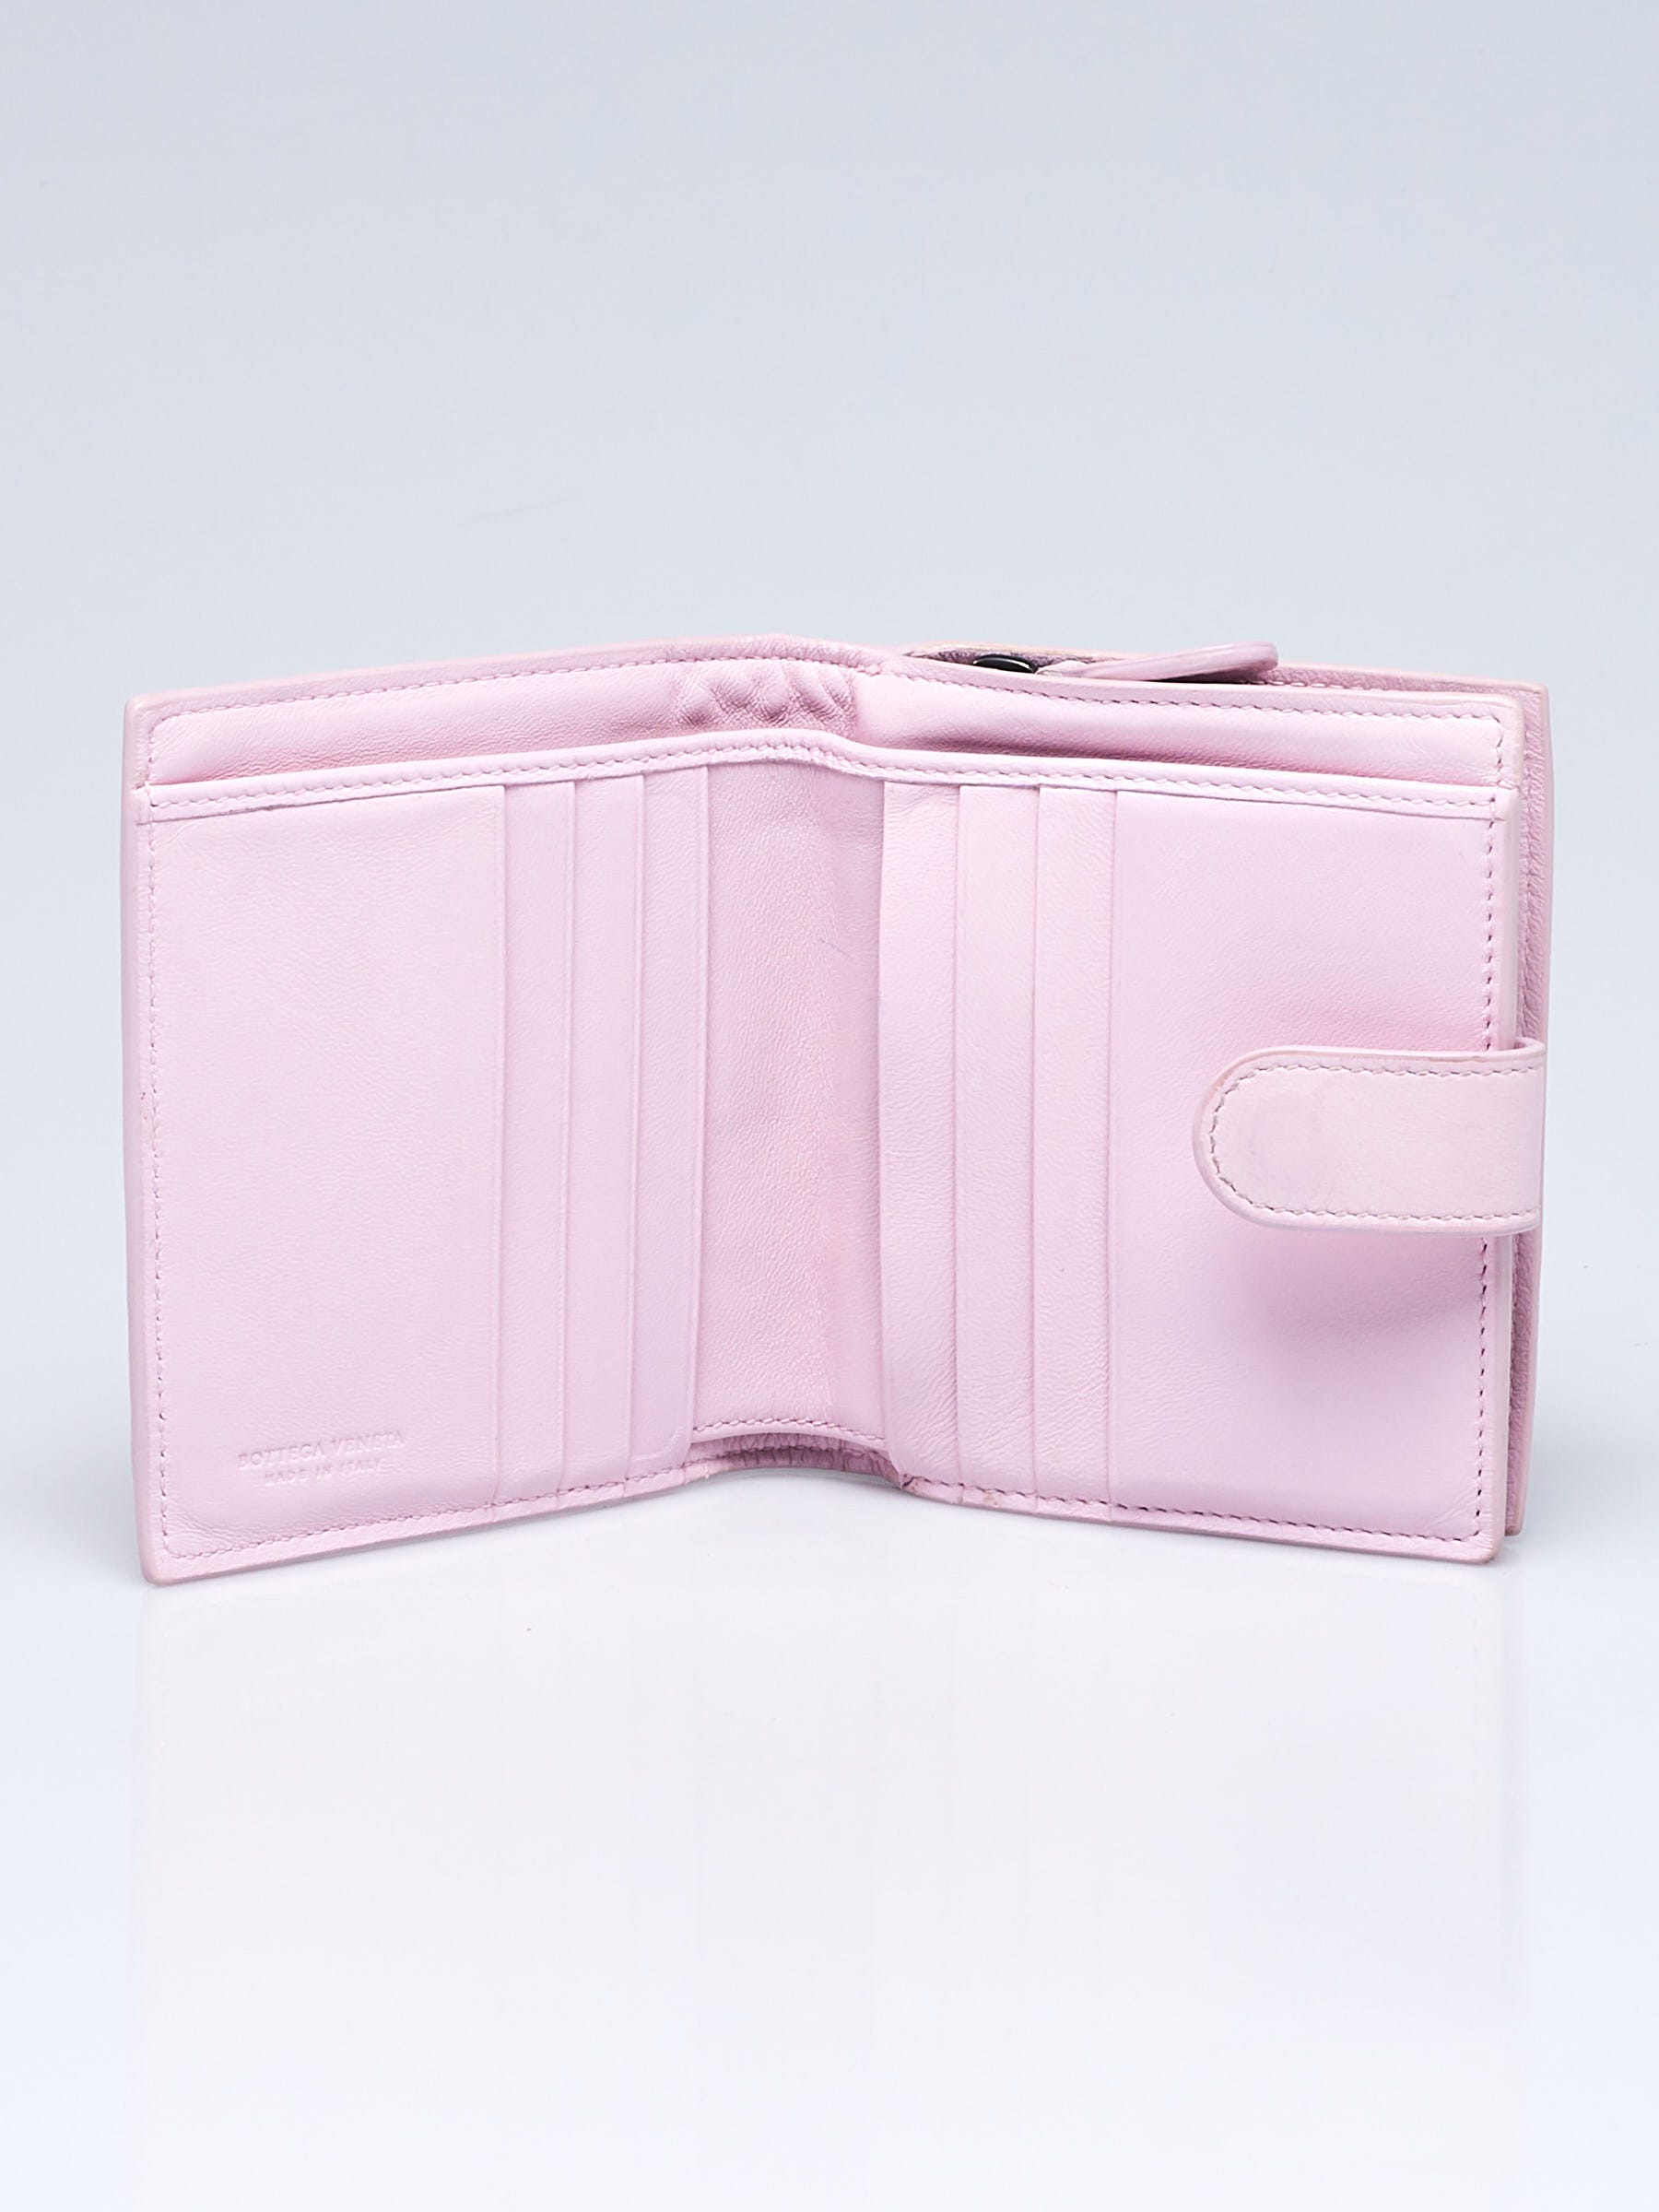 Louis Vuitton - Authenticated Zippy Wallet - Leather Pink Plain For Woman, Very Good condition